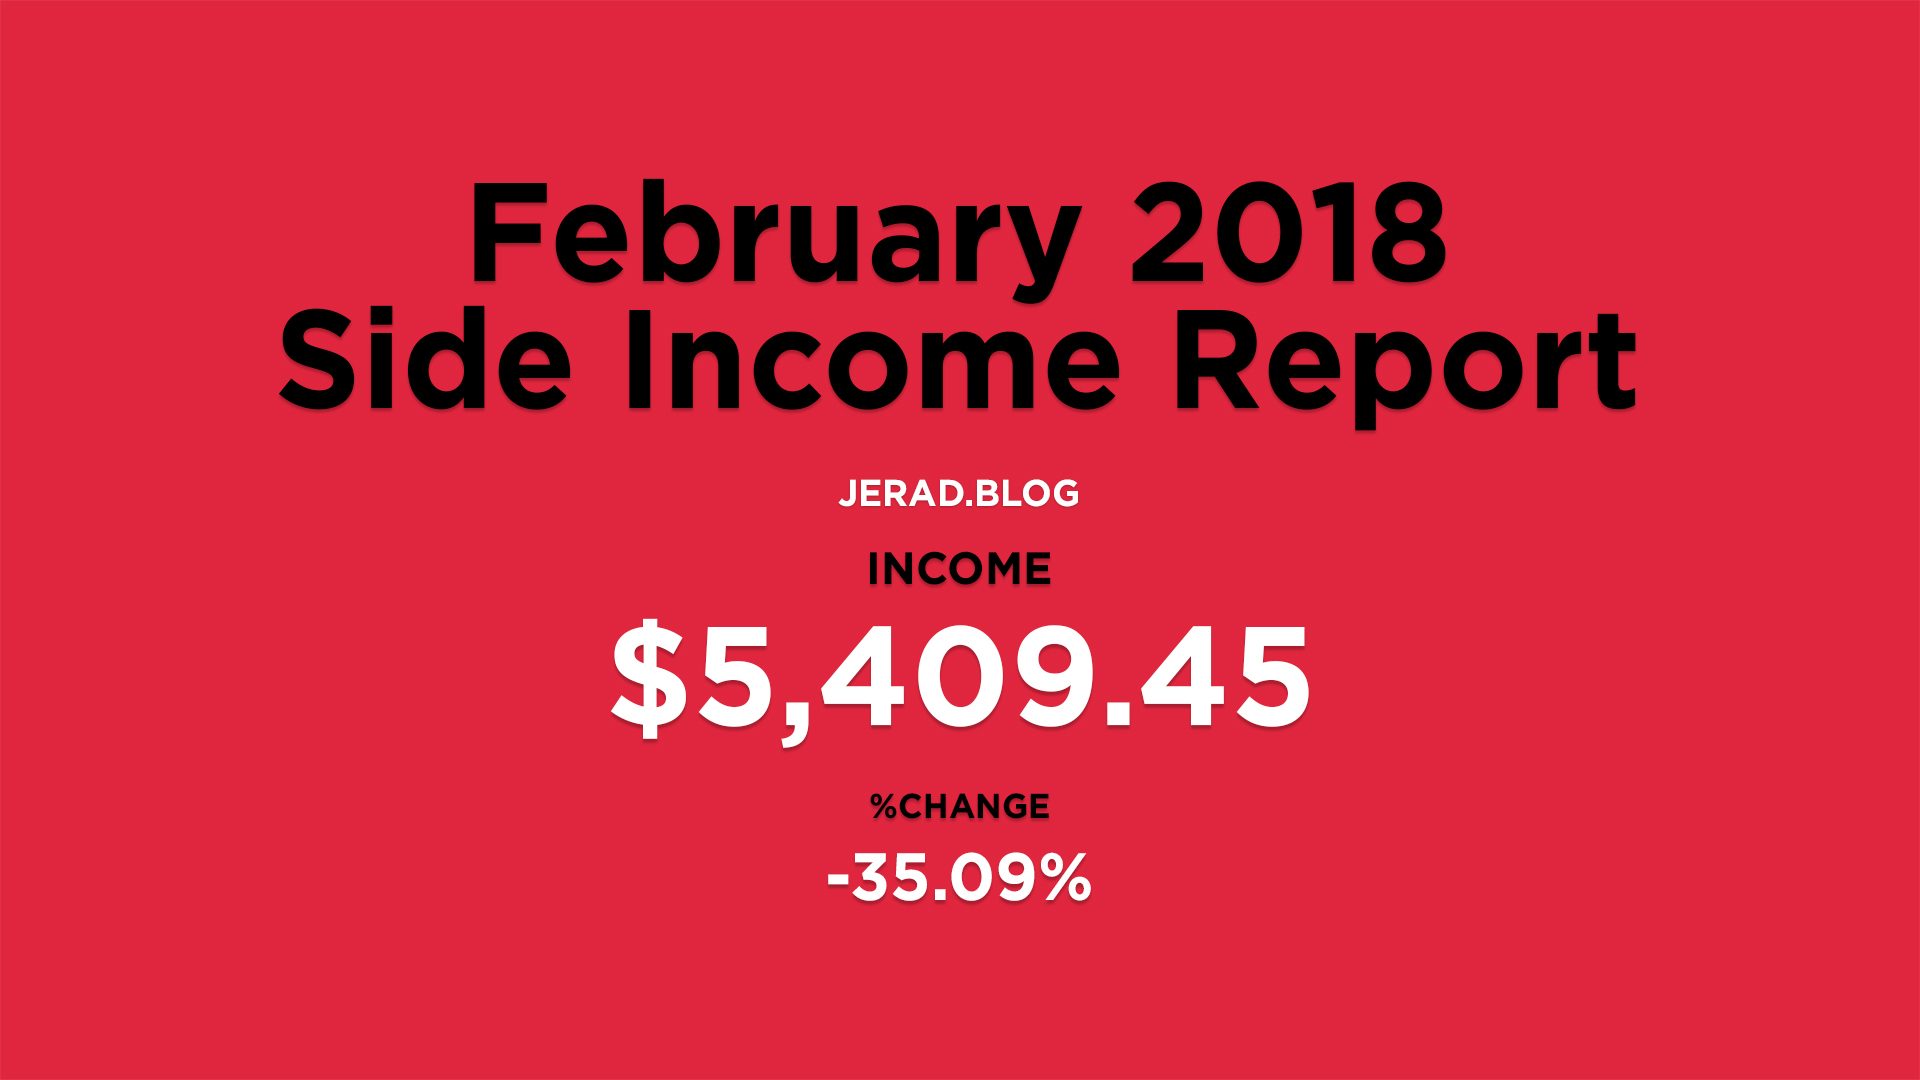 February 2018 Side Income Report